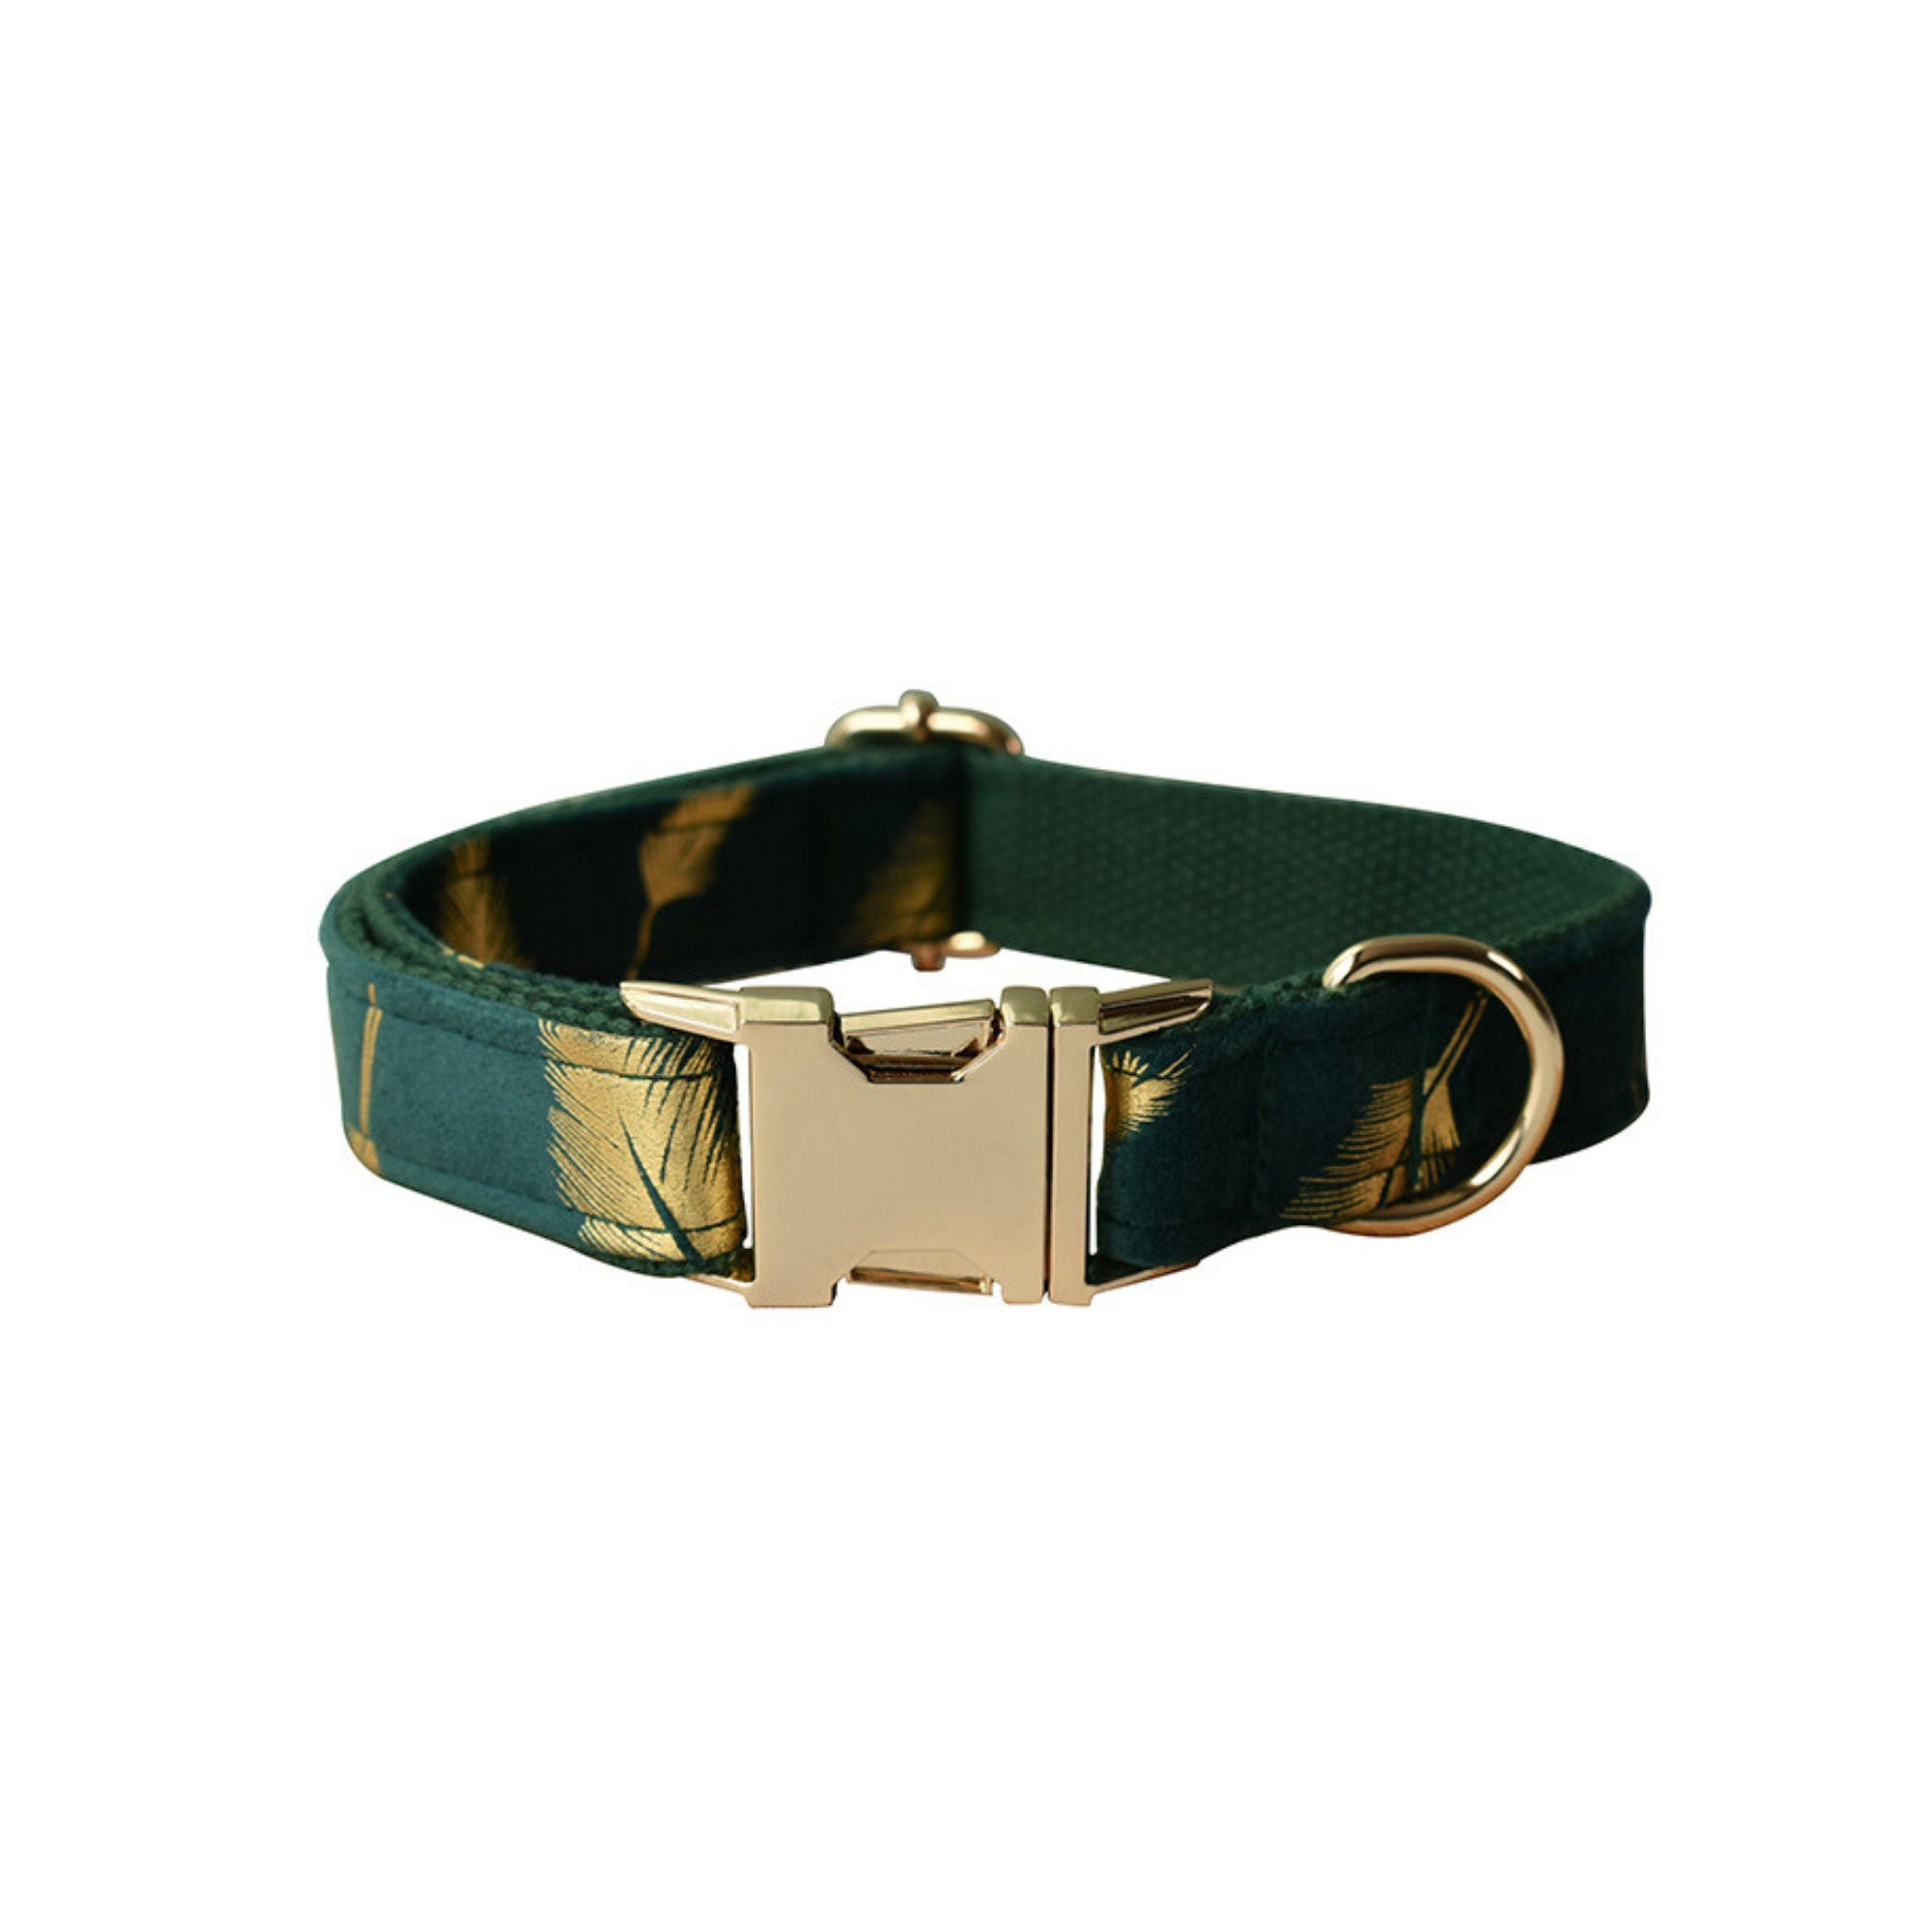 Personalized Engraved Dog Collar with Matching Harness and Leash Set in Emerald Green and Golden Leaves Pattern, Great for all Occasions